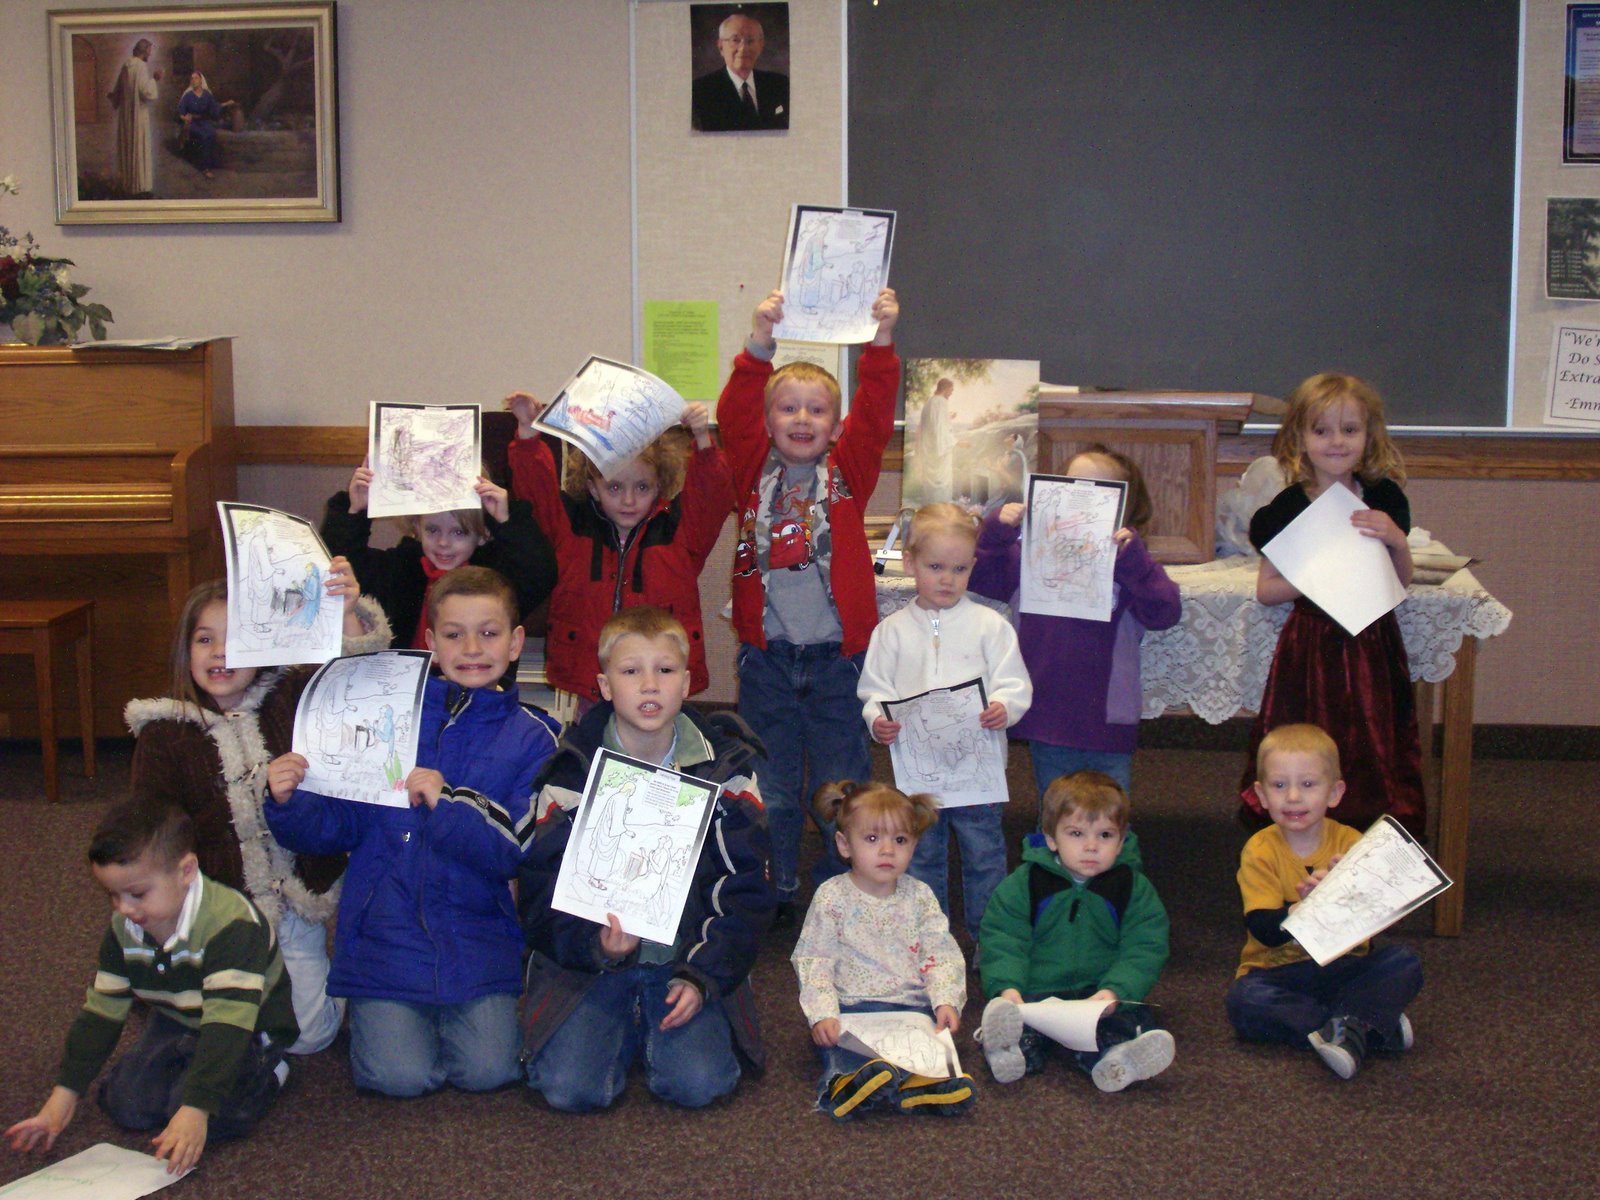 [Group+of+kids+showing+coloring+pages.jpg]